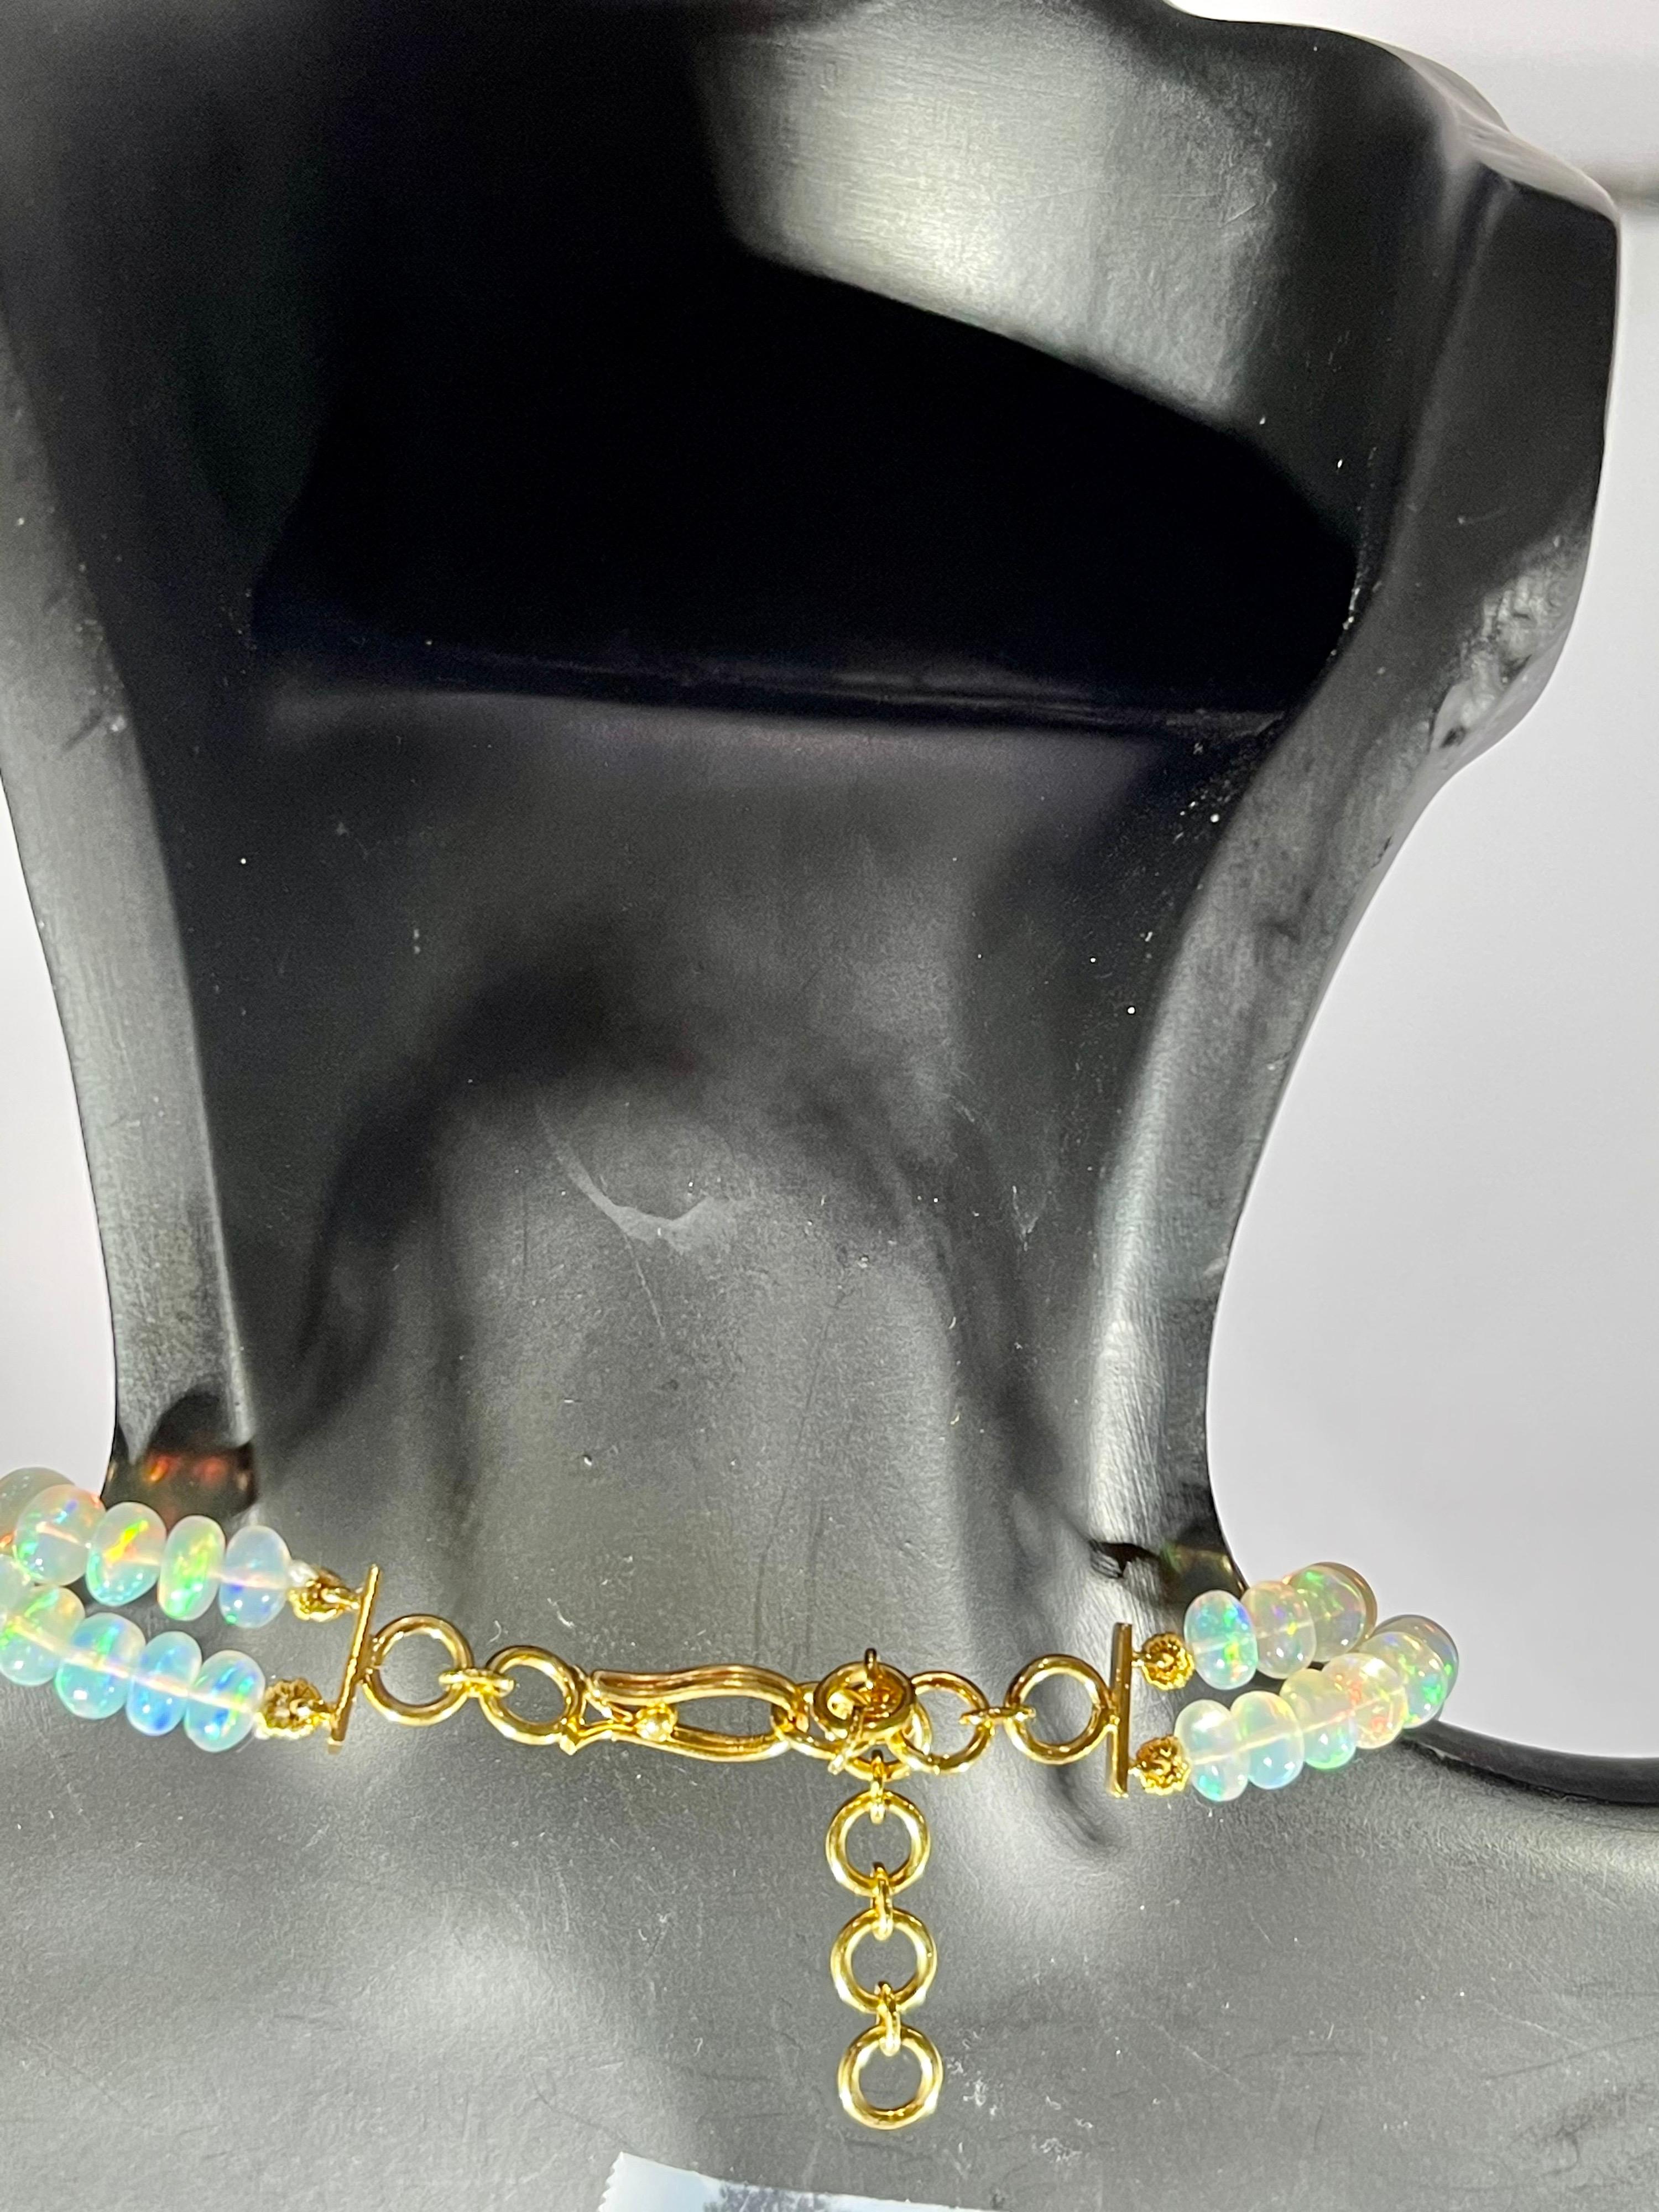 beaded opal necklace